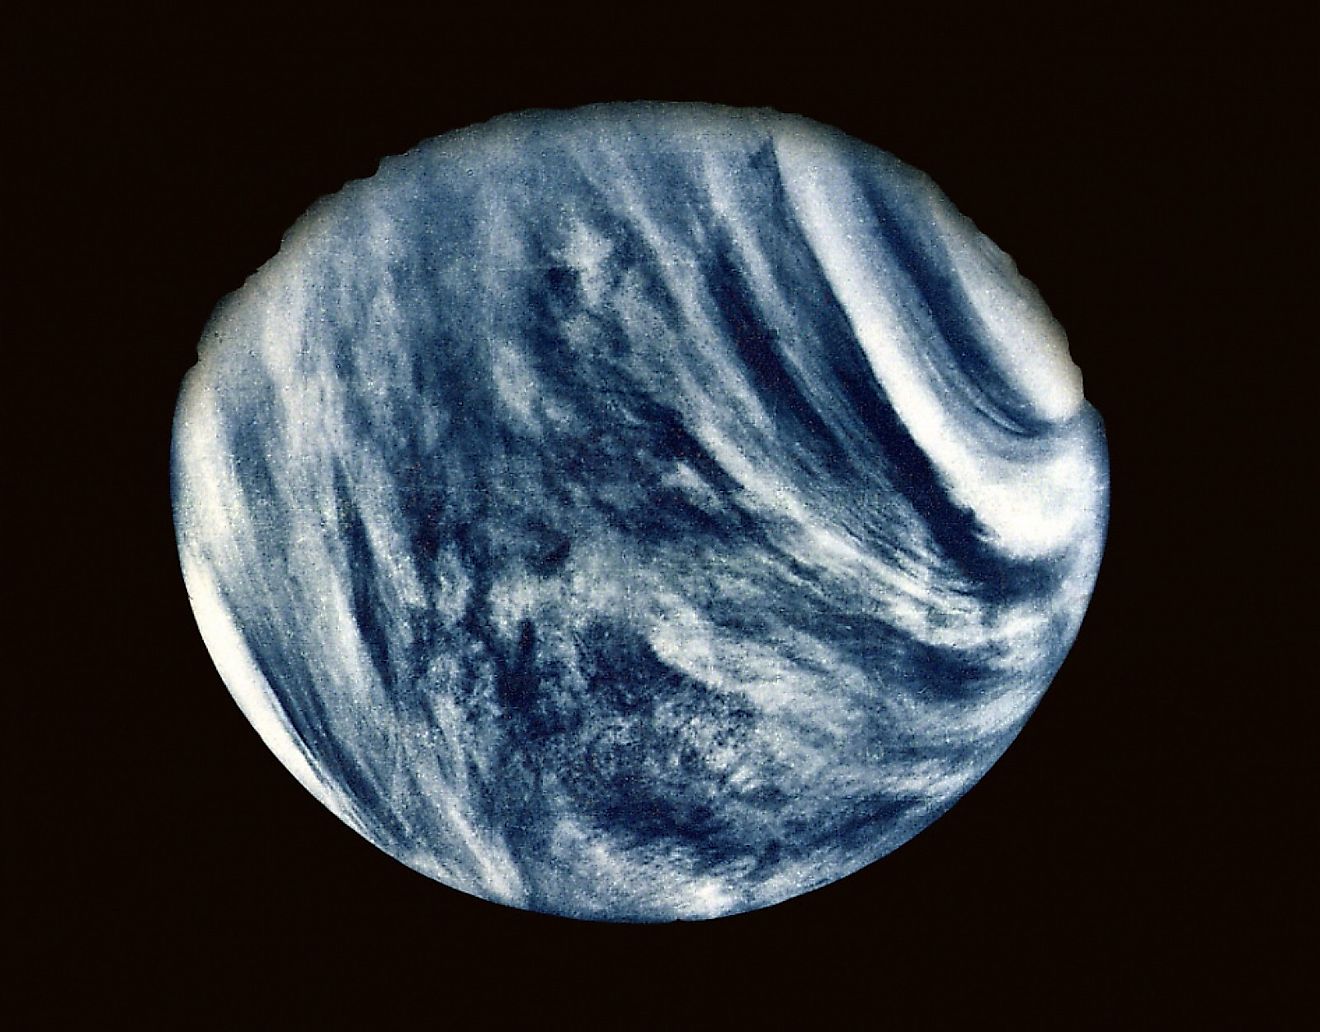 One of the earliest images ever taken of Venus. Image credit: NASA